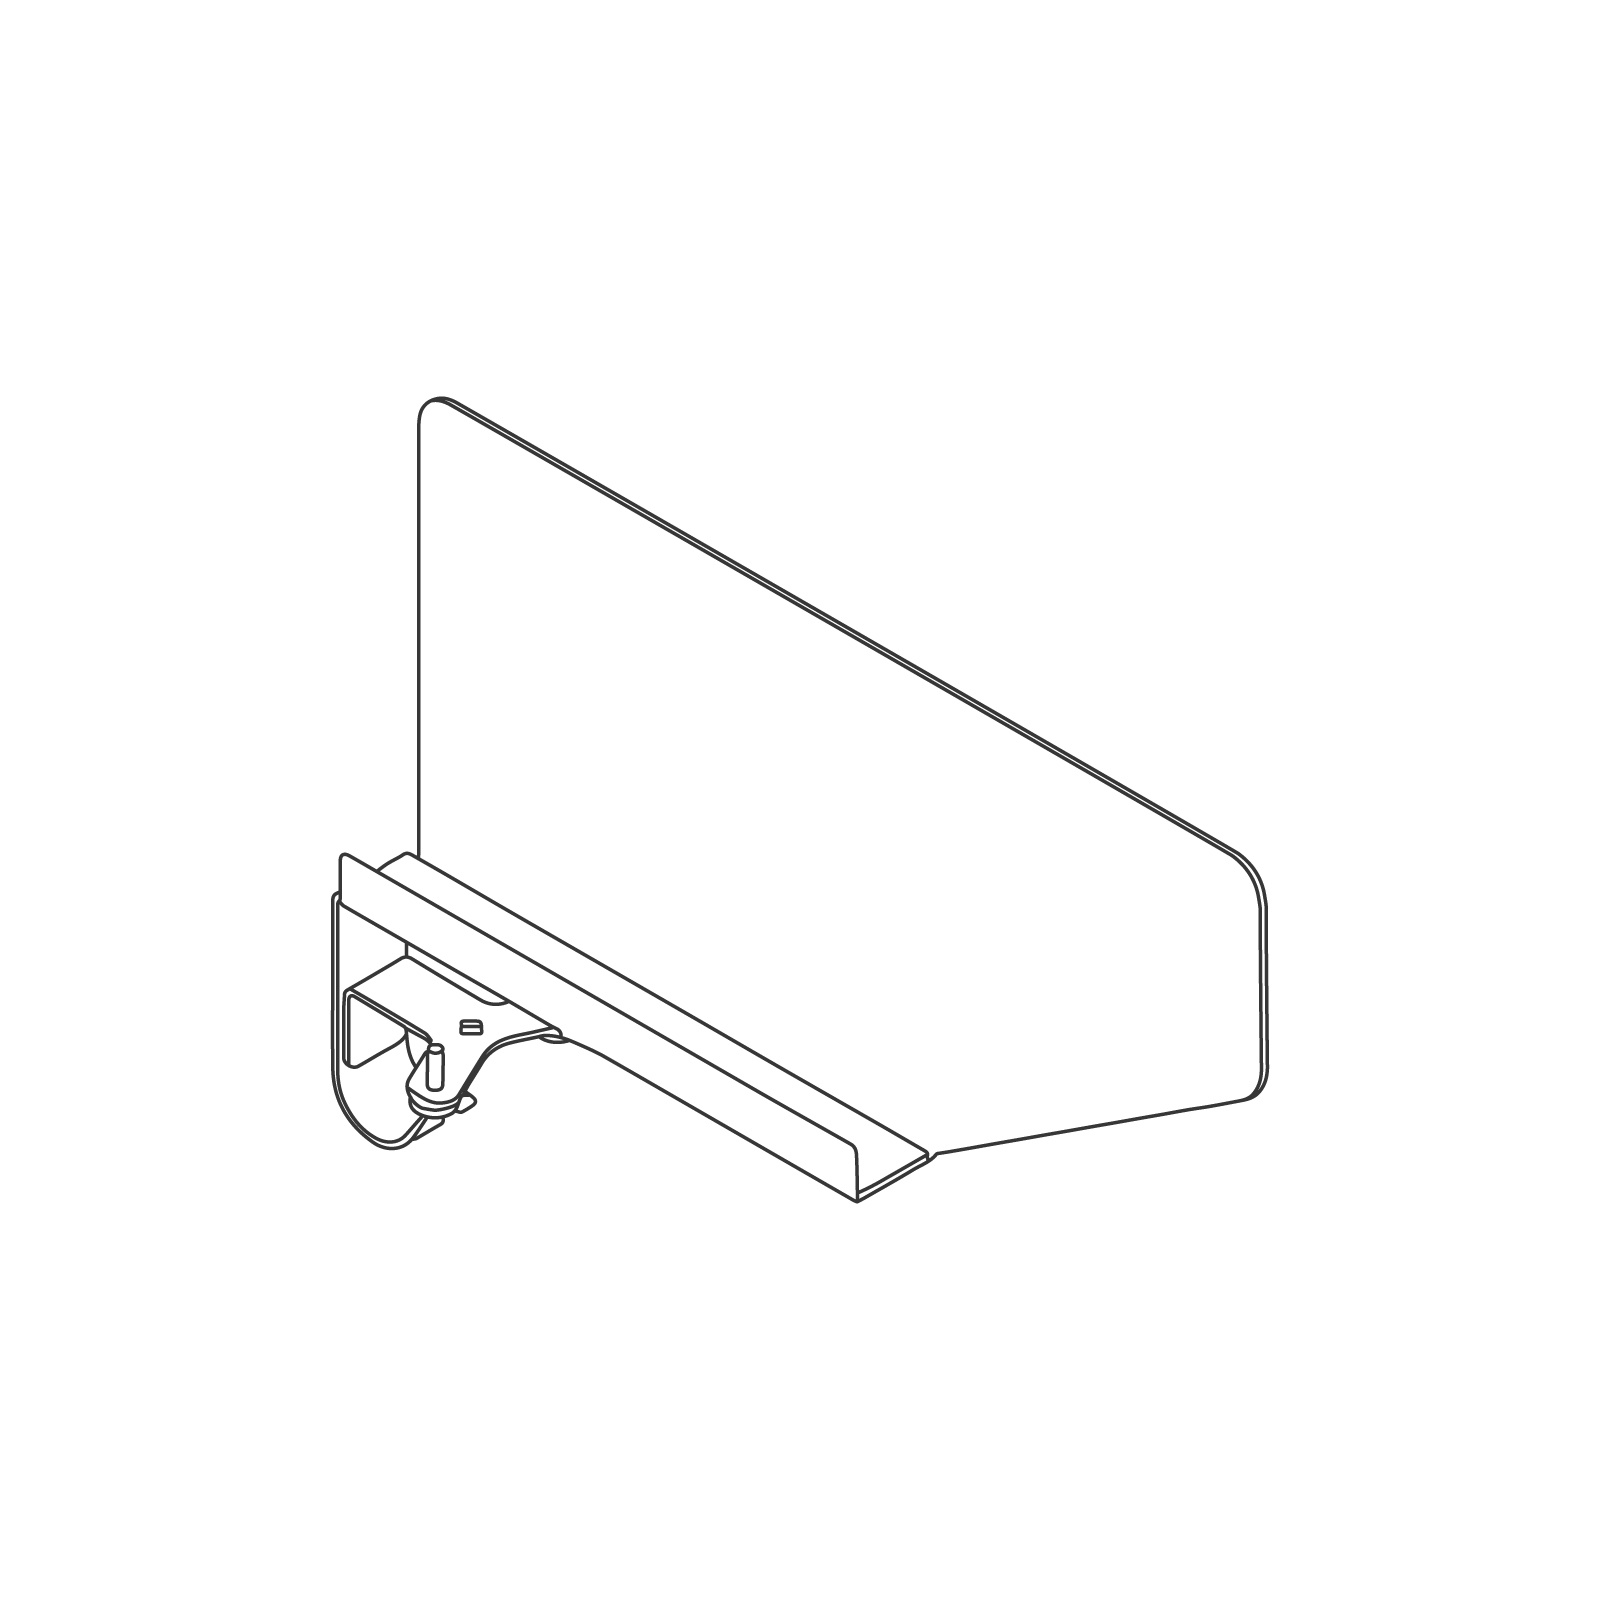 A line drawing - OE1 Boundary Screen